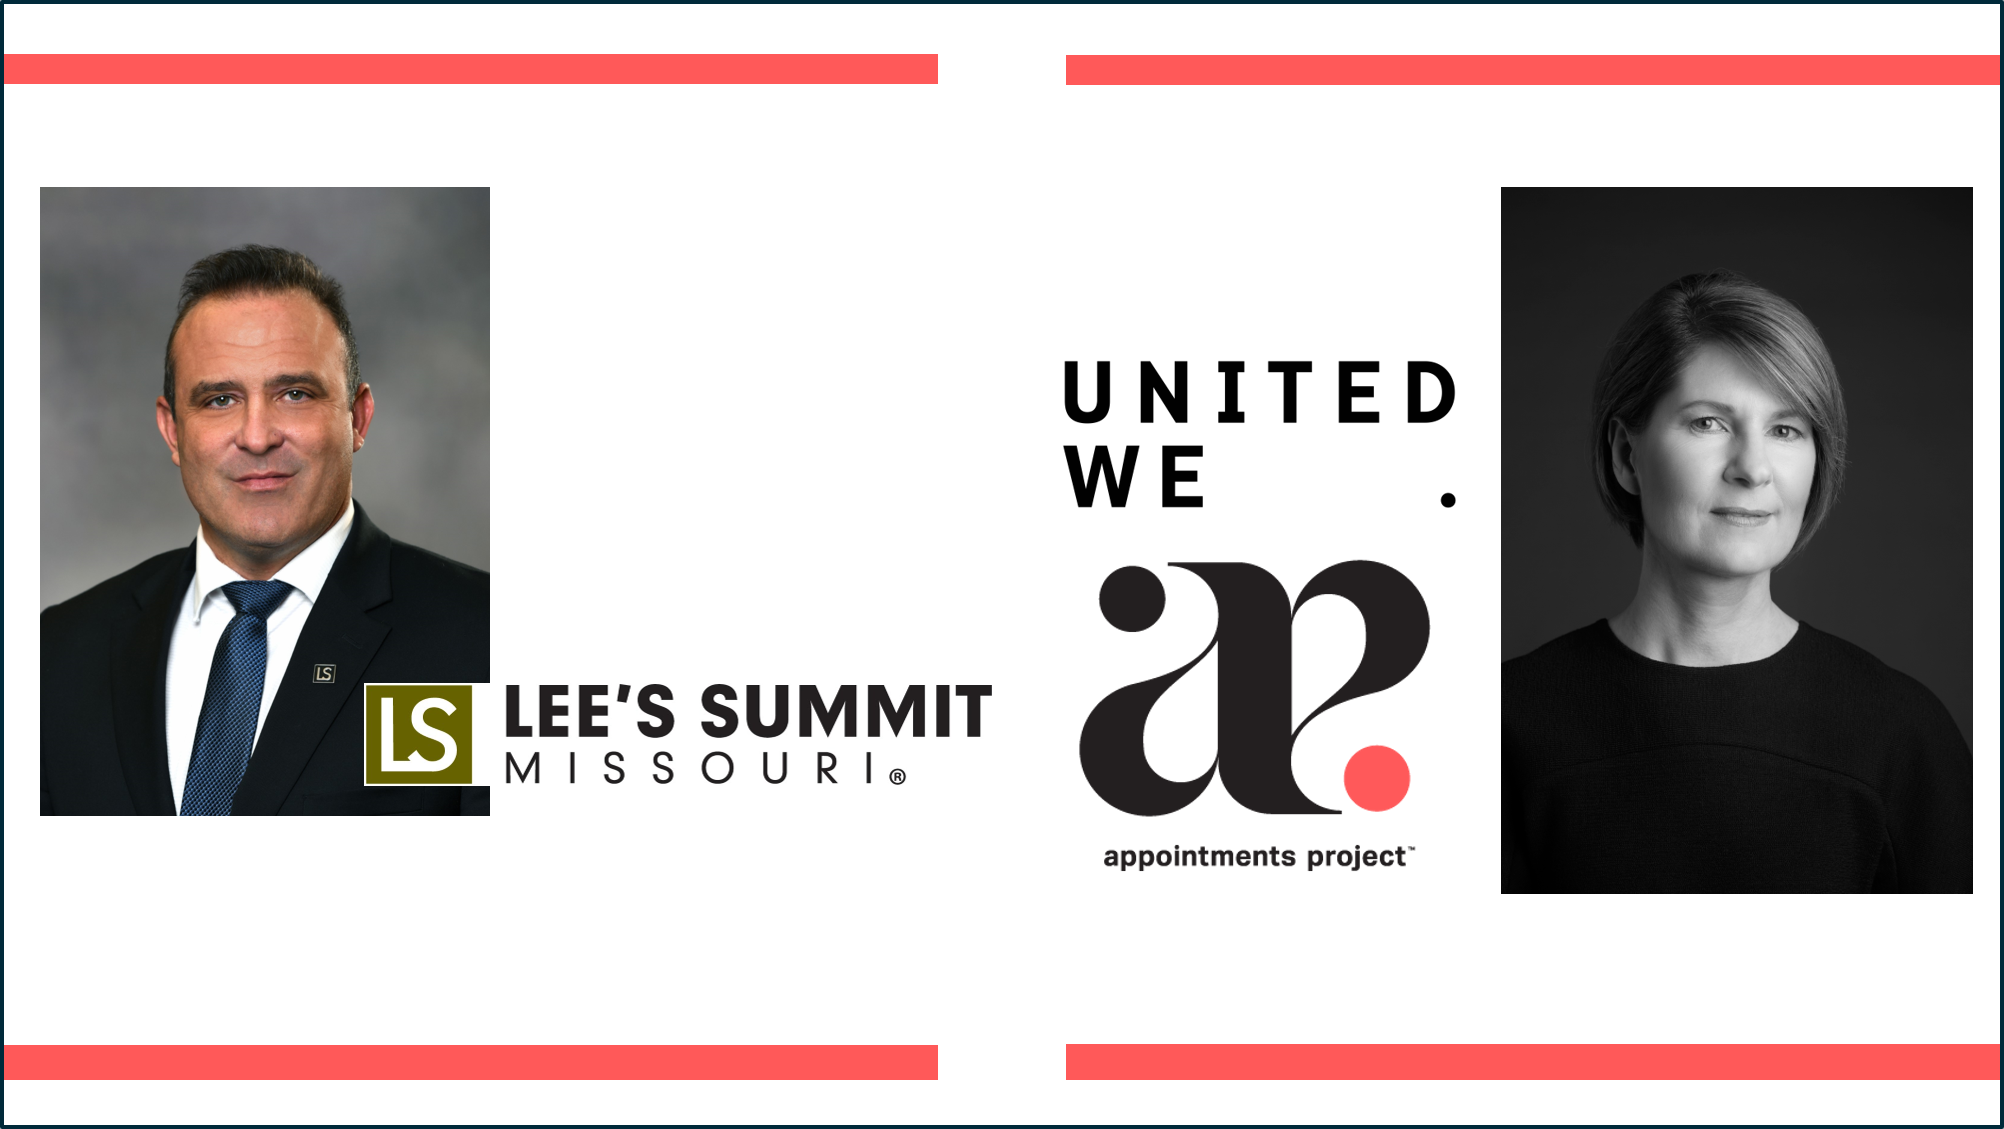 Lee's Summit Mayor and Appointments Project® Partner to Increase Women's  Participation on Boards and Commissions-United WE